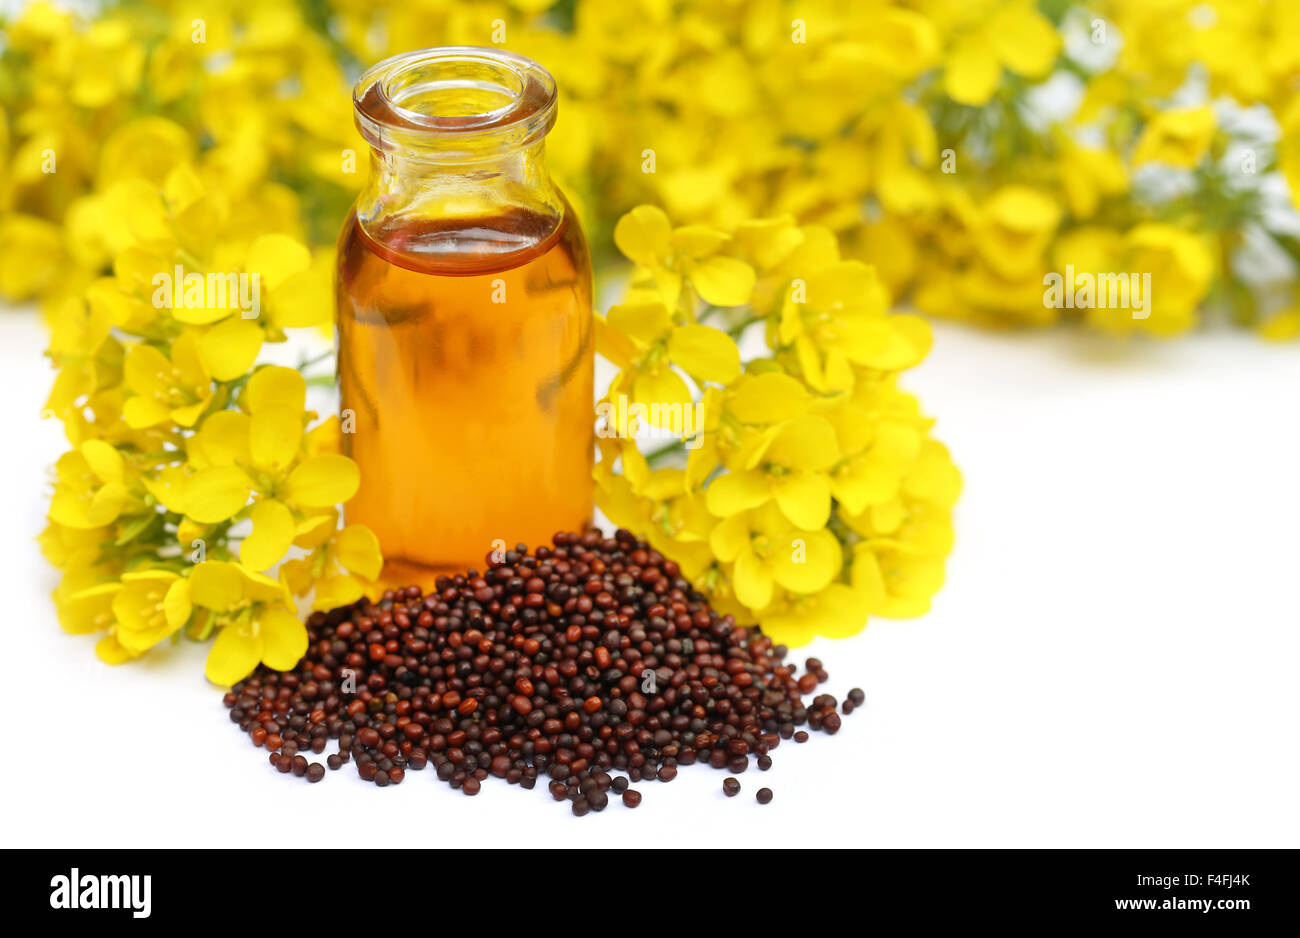 Mustard seed with oil and flower over white background Stock Photo - Alamy